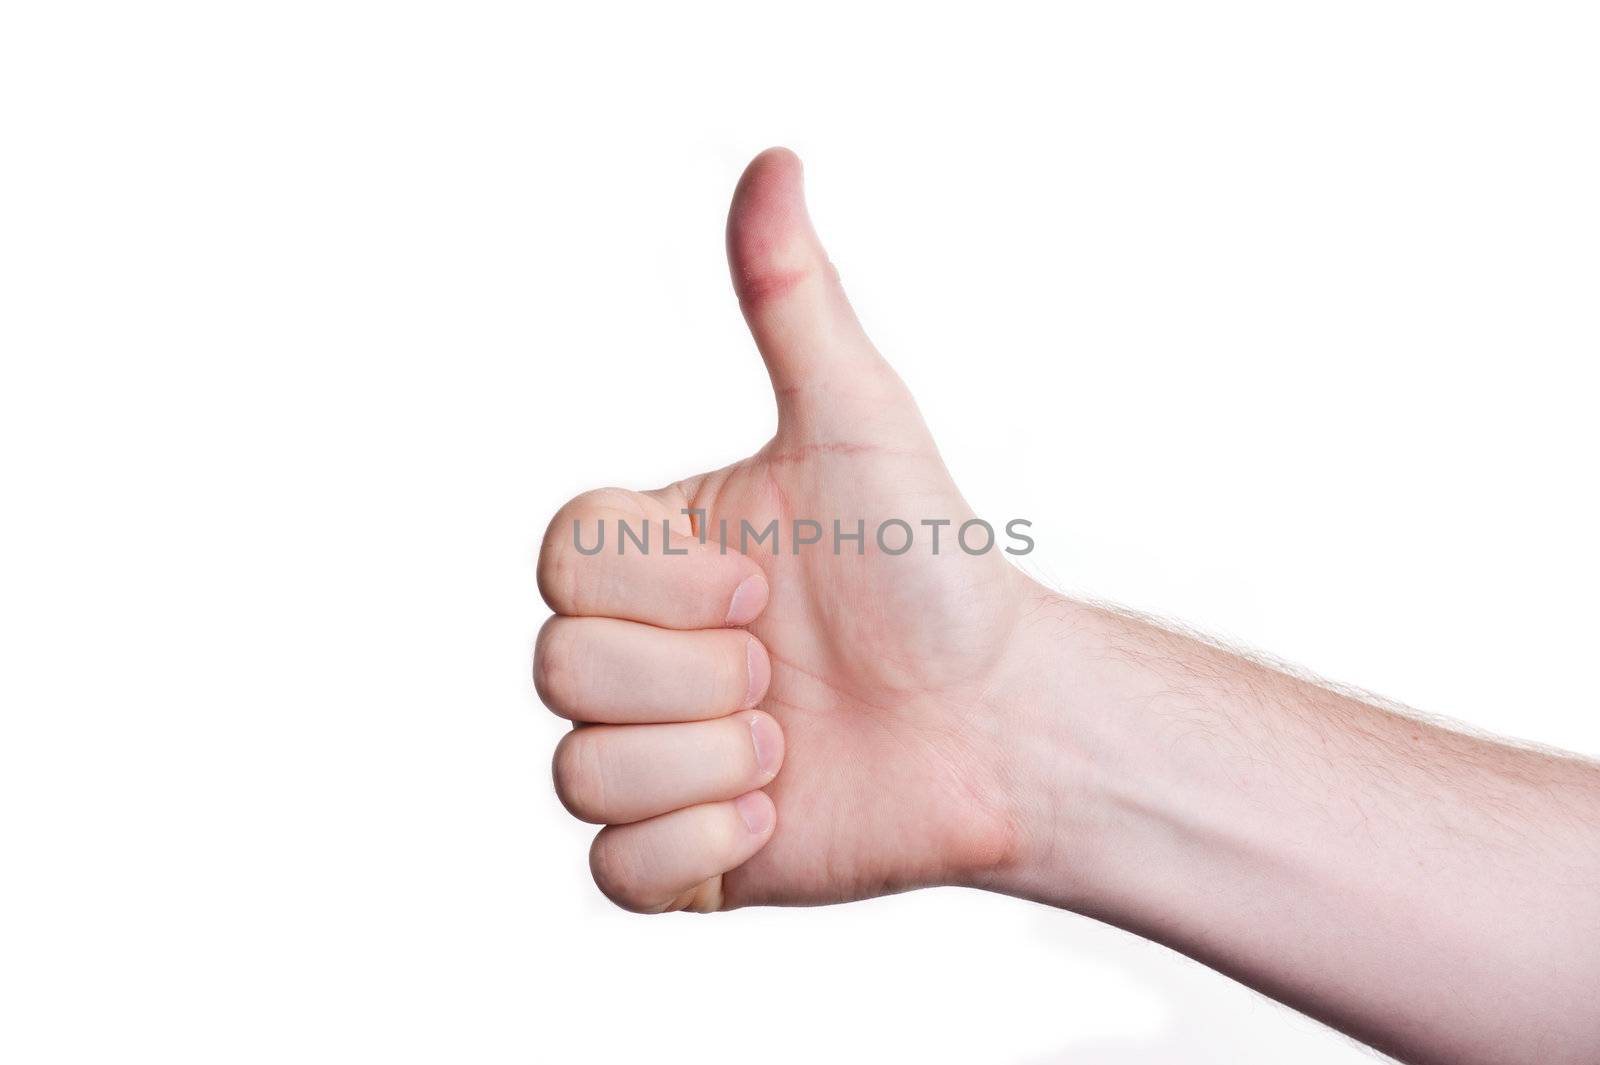 Thumbs Up by Marcus